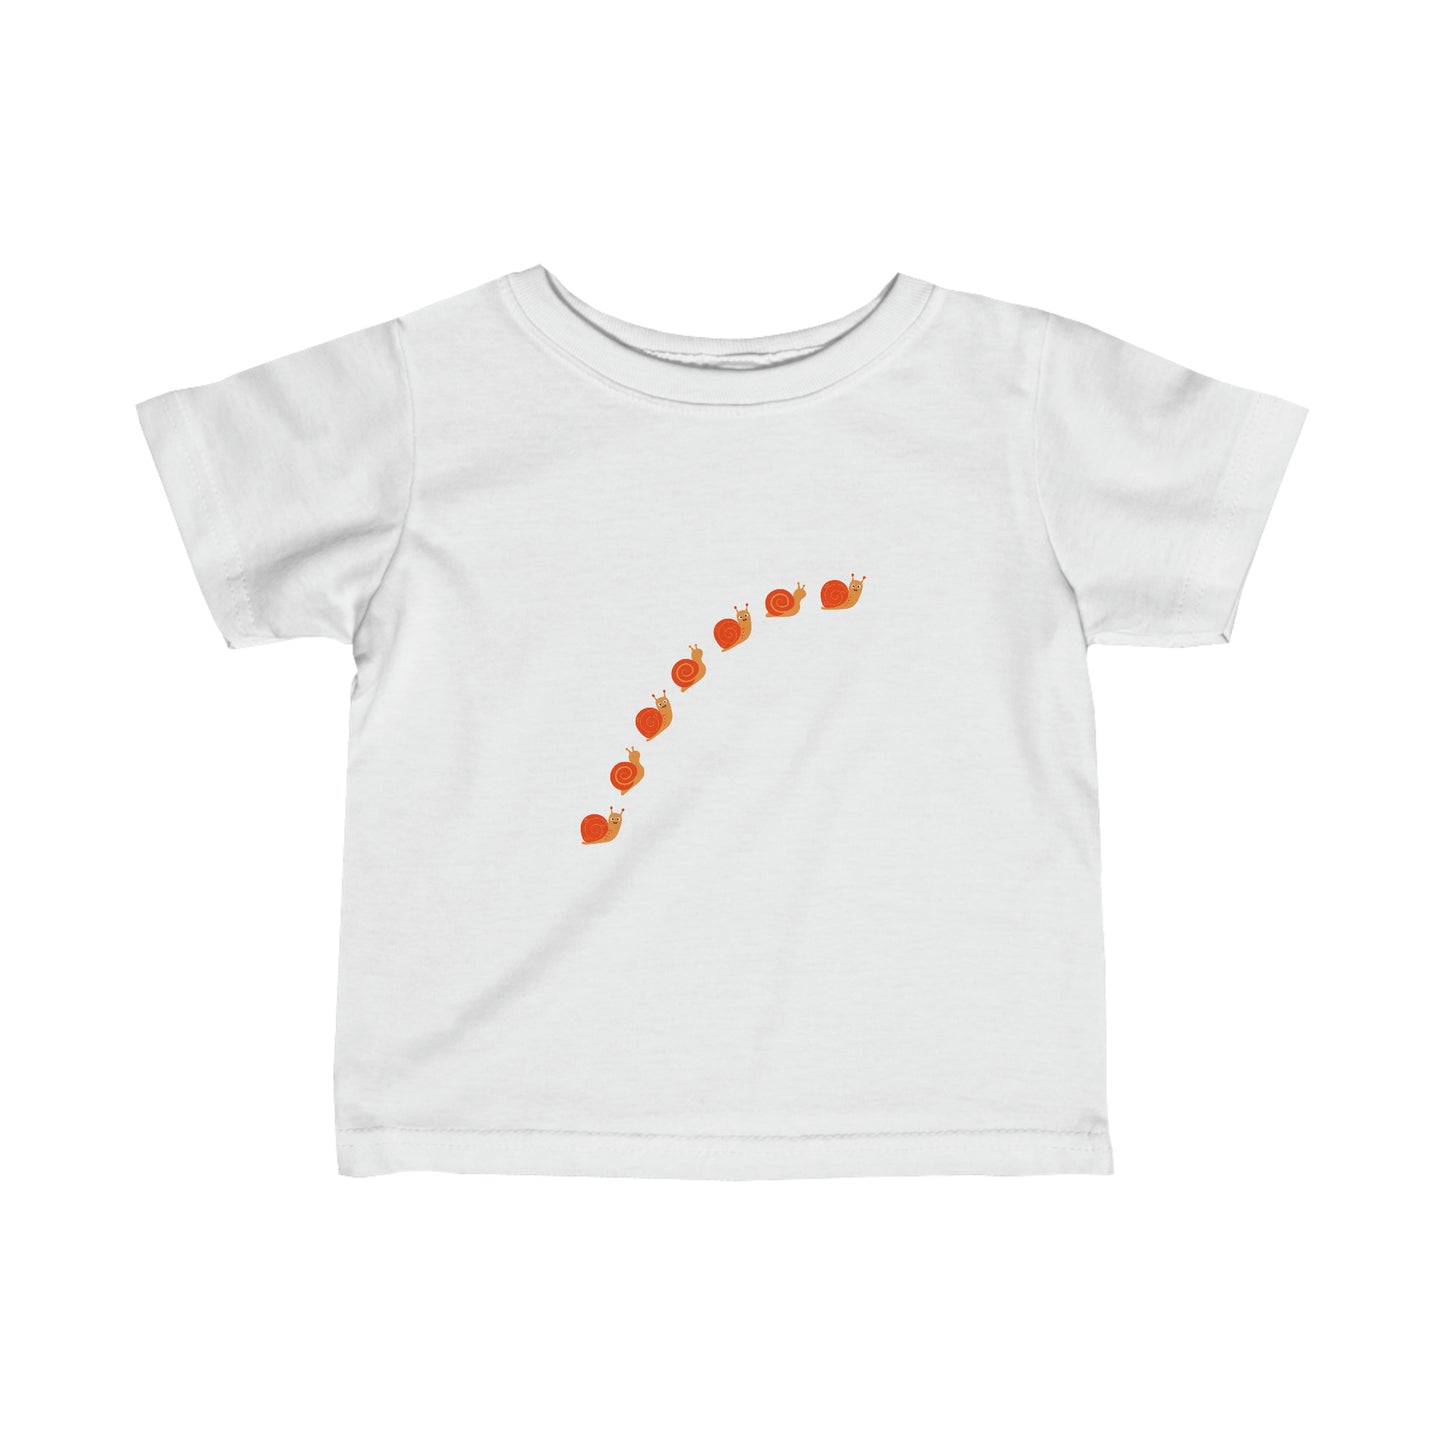 Snail Crossing Bug- Baby, Infant, Toddler, Soft Cotton, T-shirt